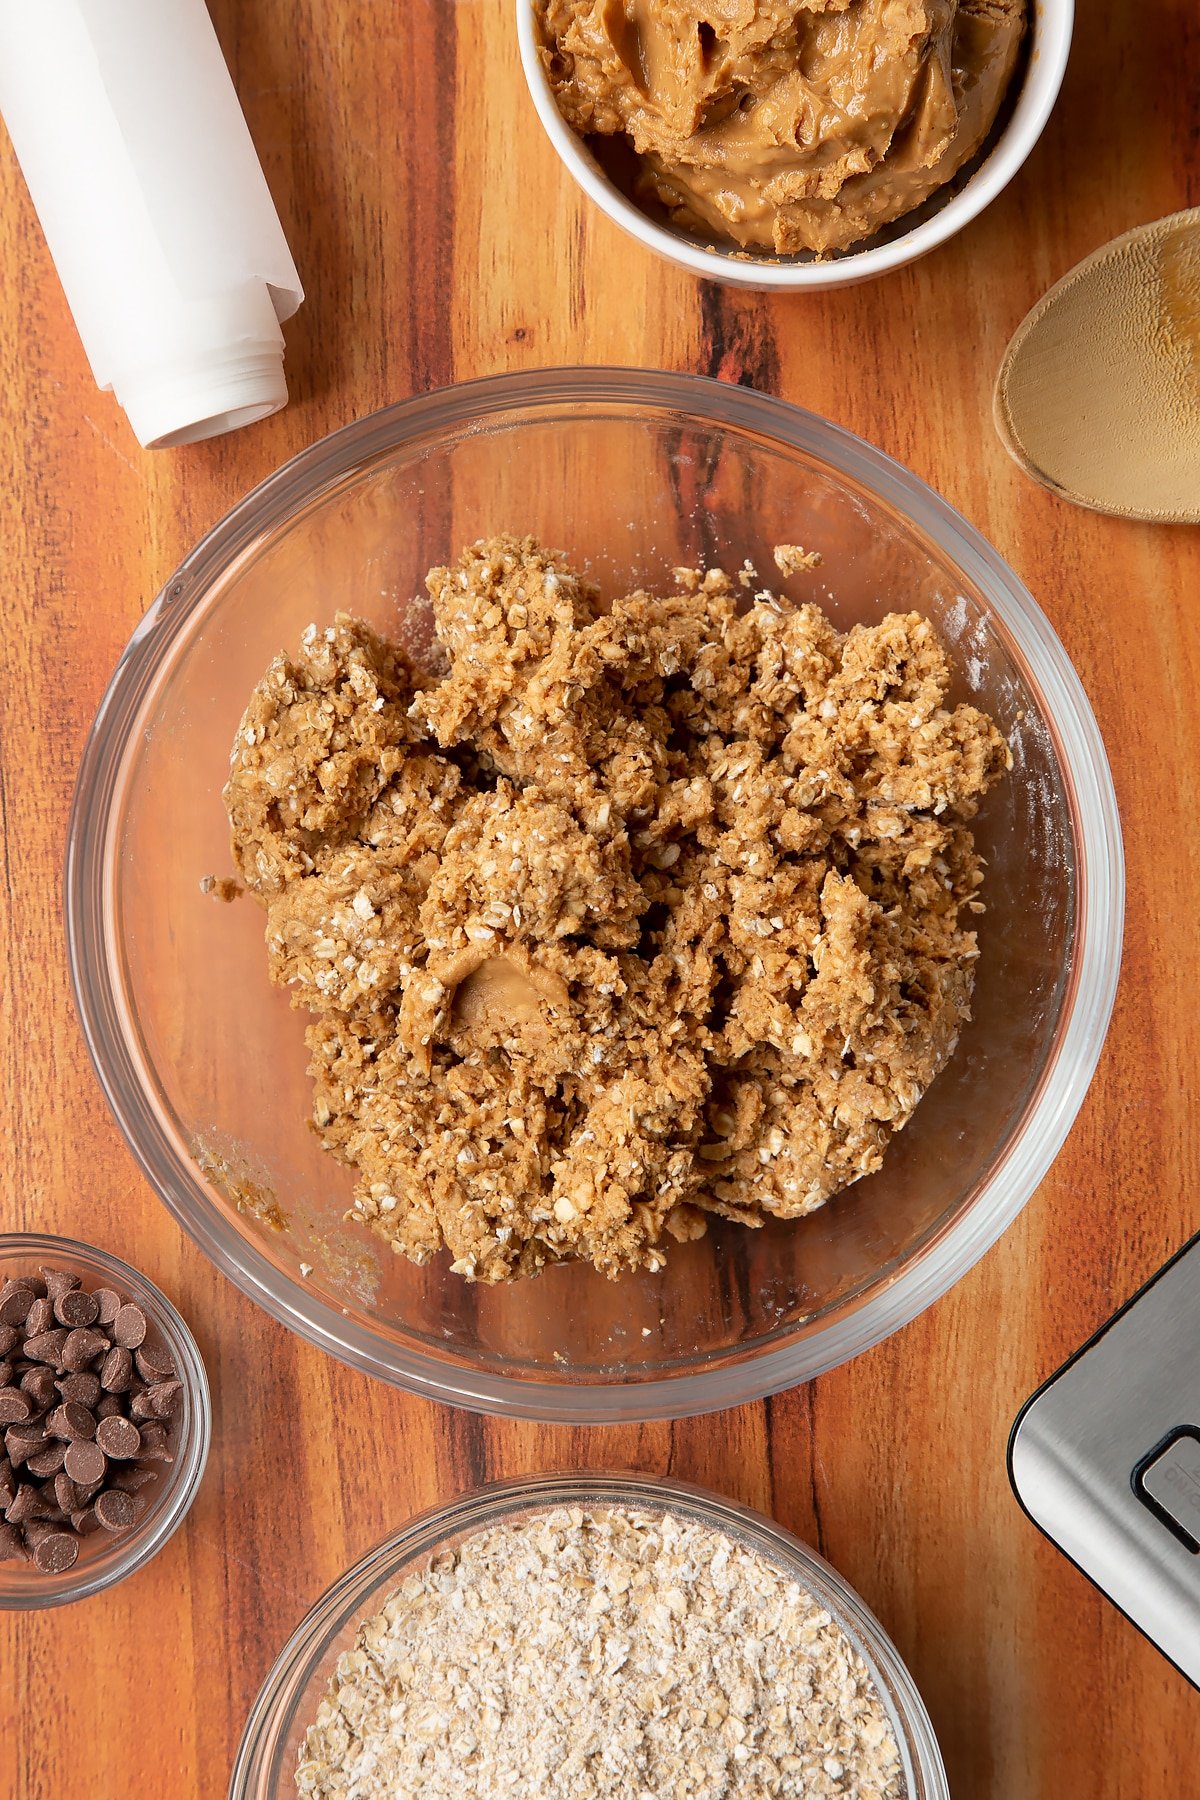 Rolled oats and peanut butter mixed together in a glass mixing bowl. Ingredients to make 3 ingredient peanut butter and oatmeal balls surround the bowl.